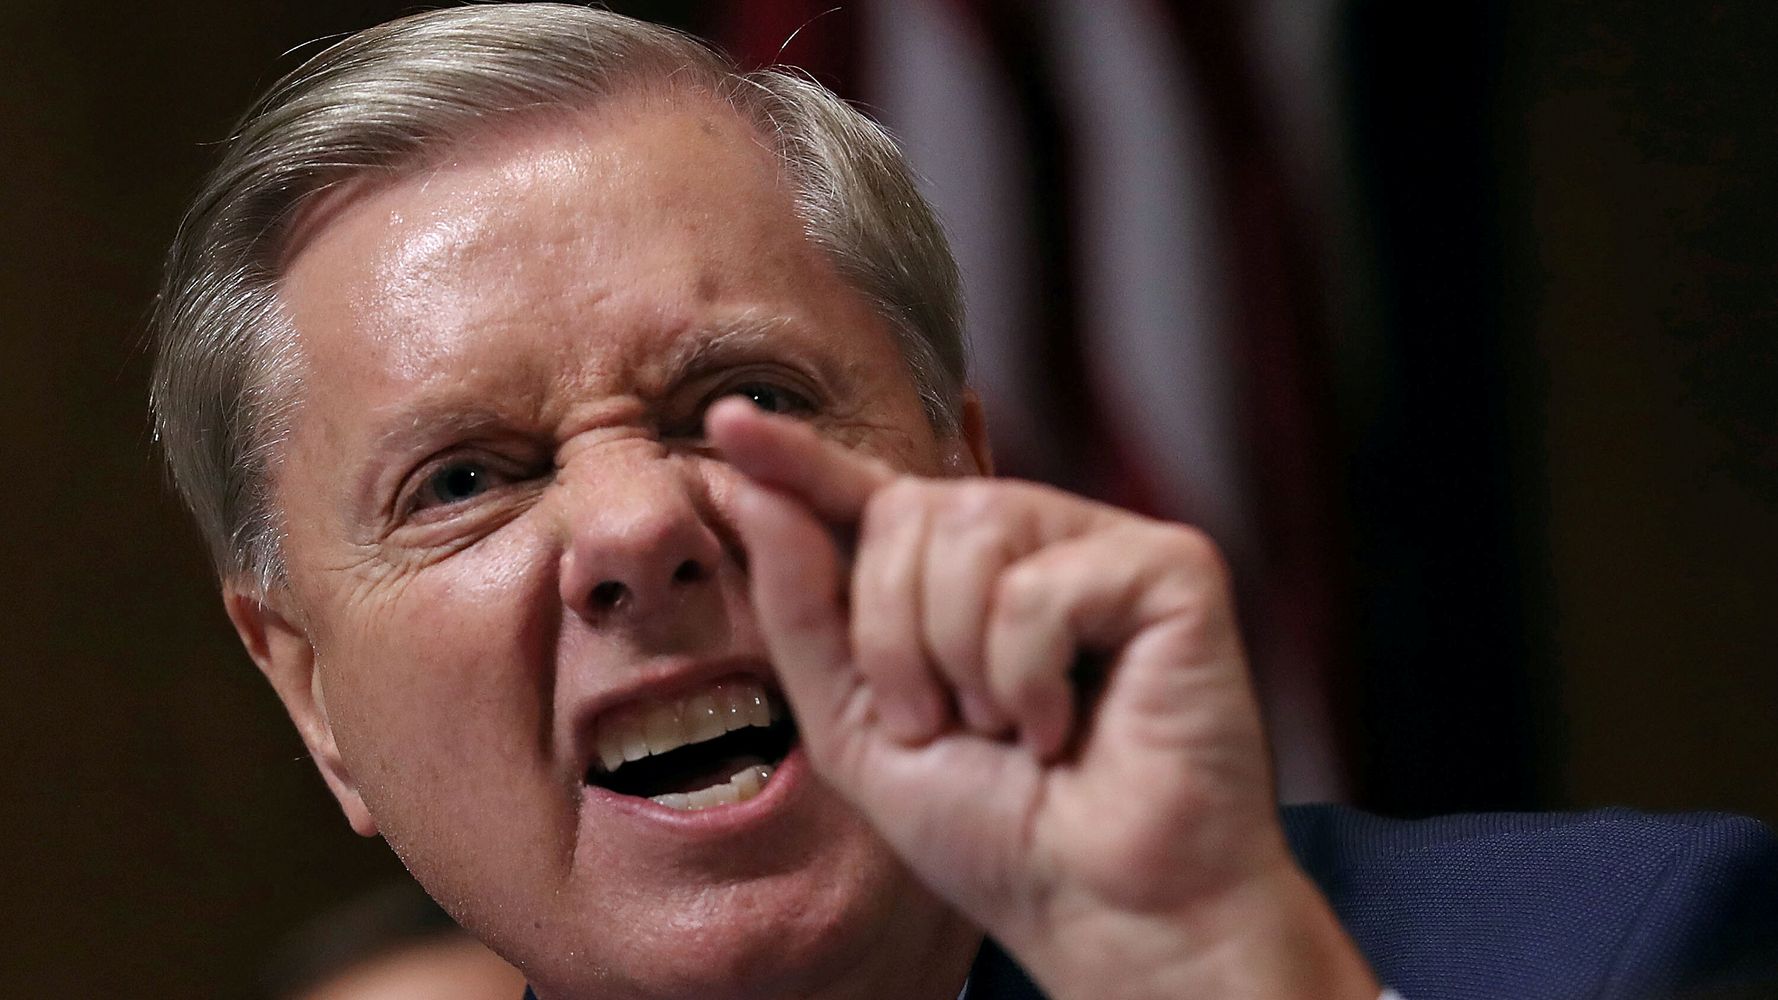 Graham Says U.S. Has A 'Place' For Women Who Follow 'Traditional Family Structure'